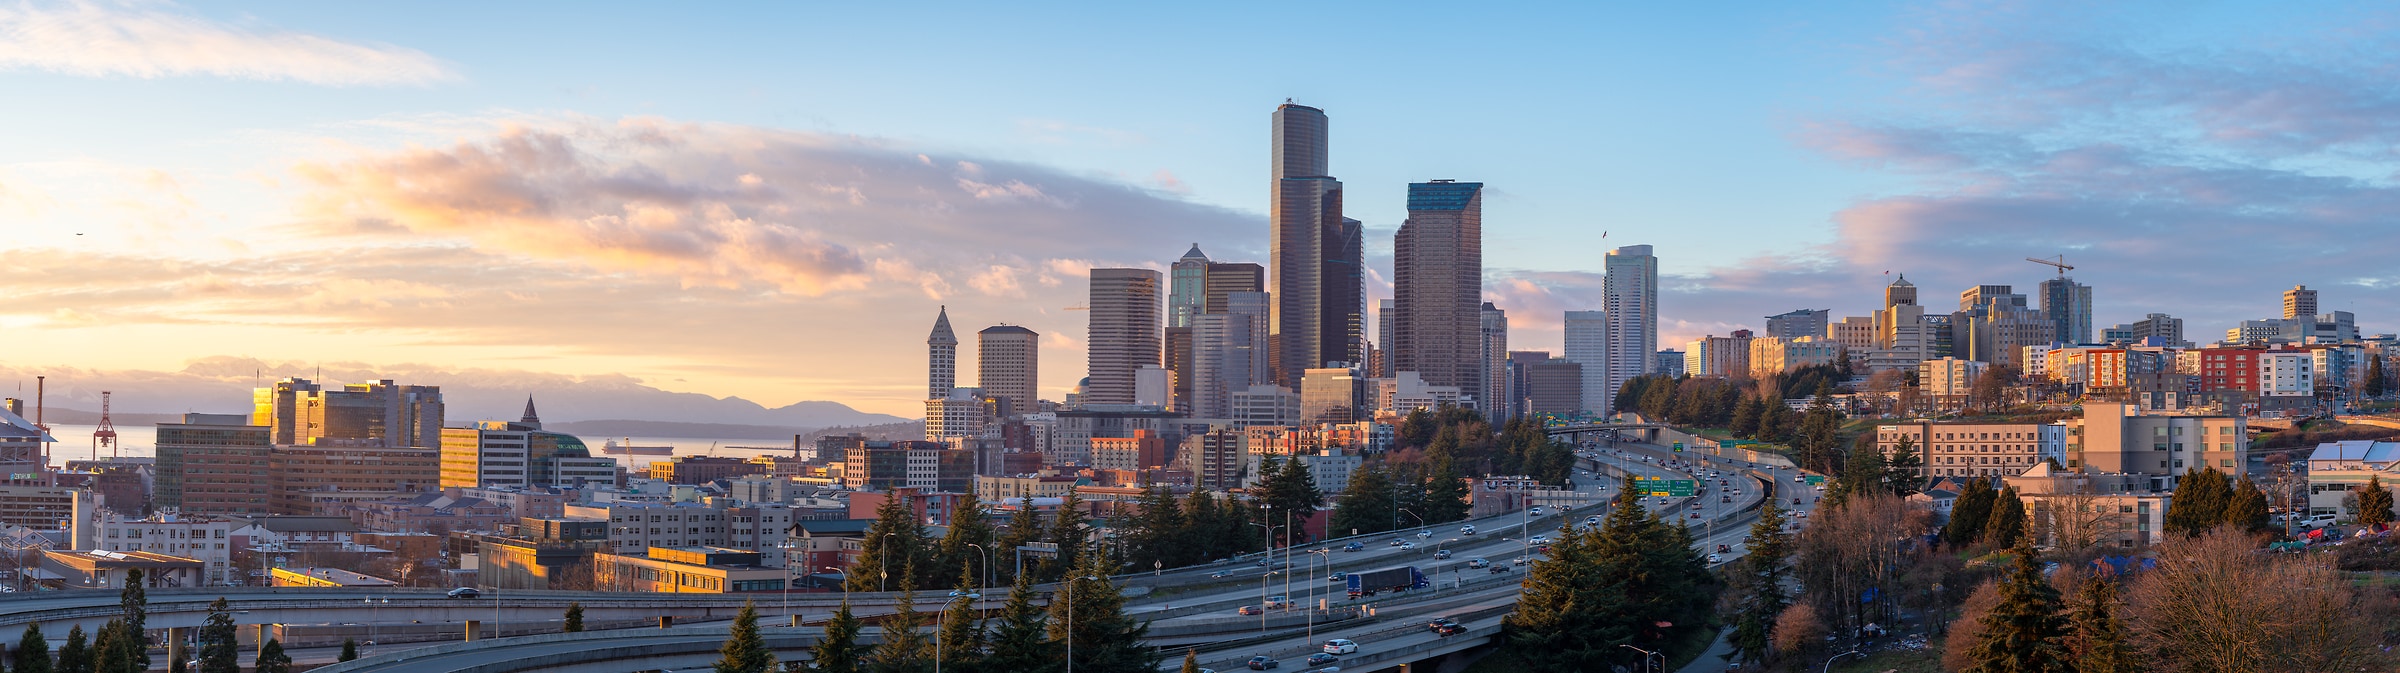 206 megapixels! A very high resolution, large-format VAST photo print of the Seattle, Washington skyline at sunset with highways in the foreground; cityscape photograph created by Greg Probst in Seattle, Washington.